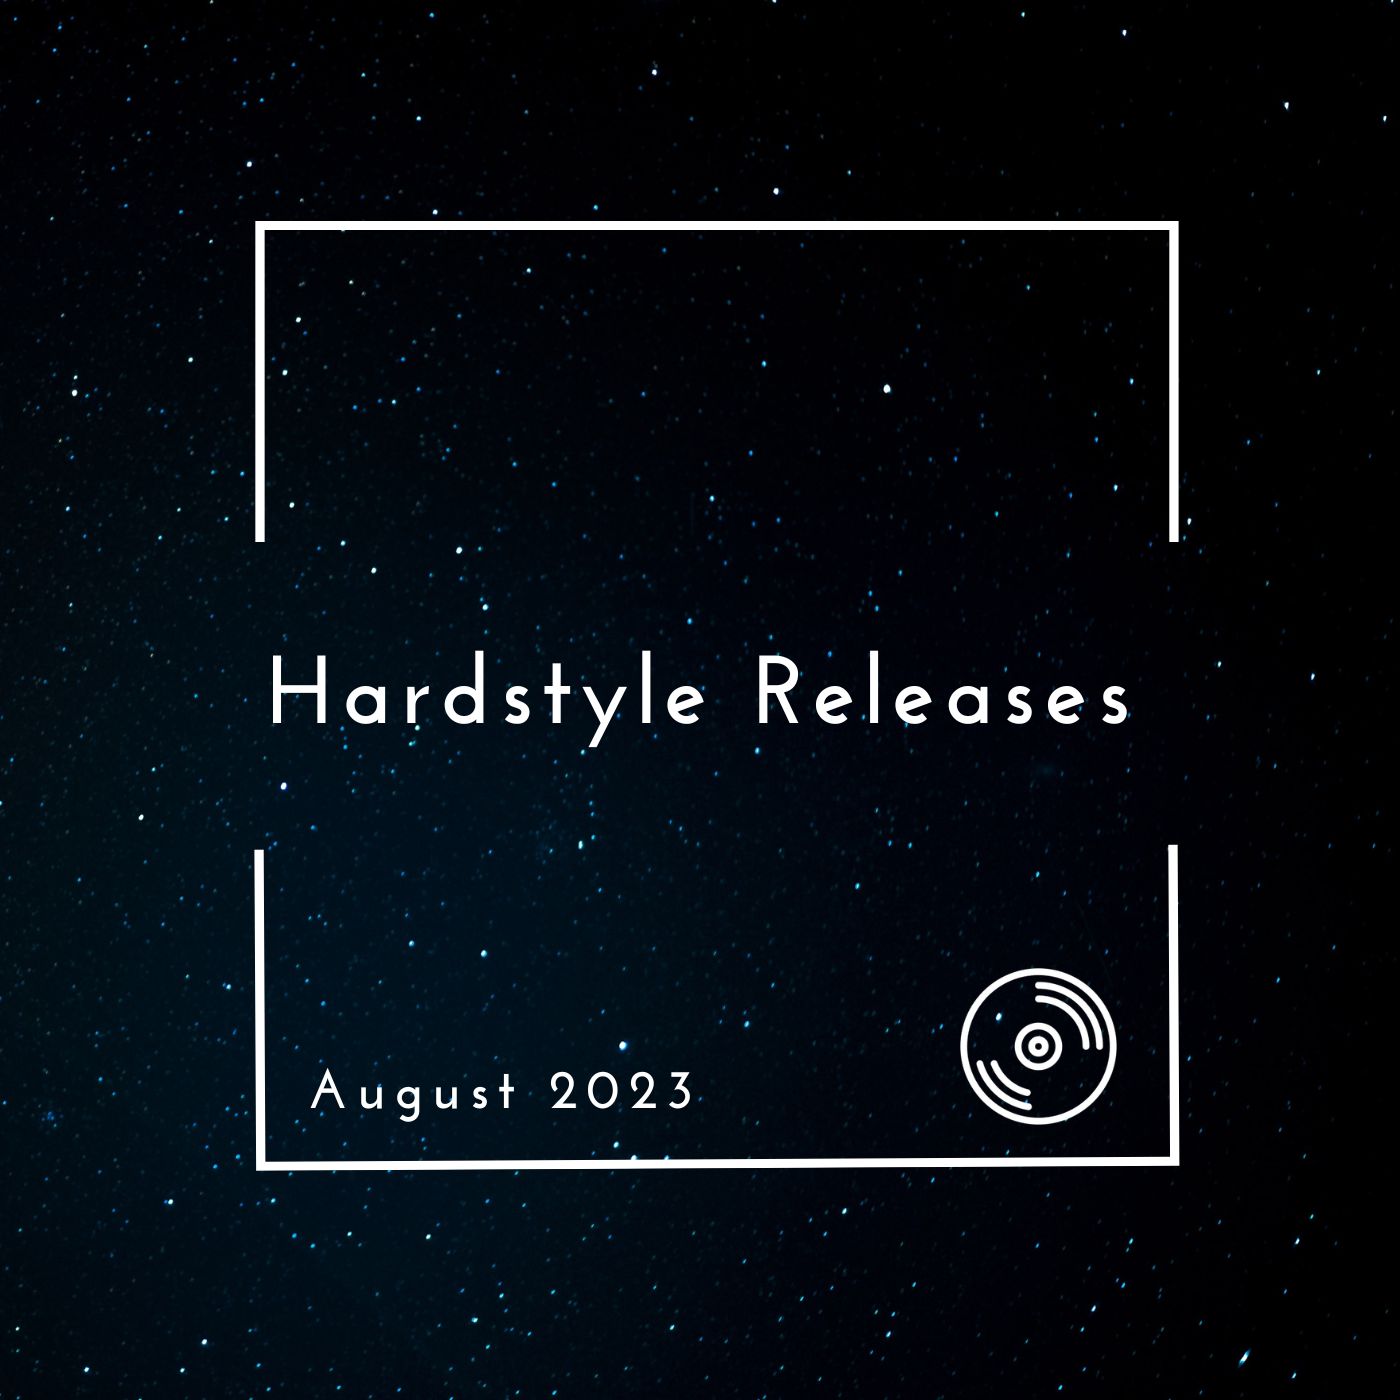 Hardstyle Releases August 2023